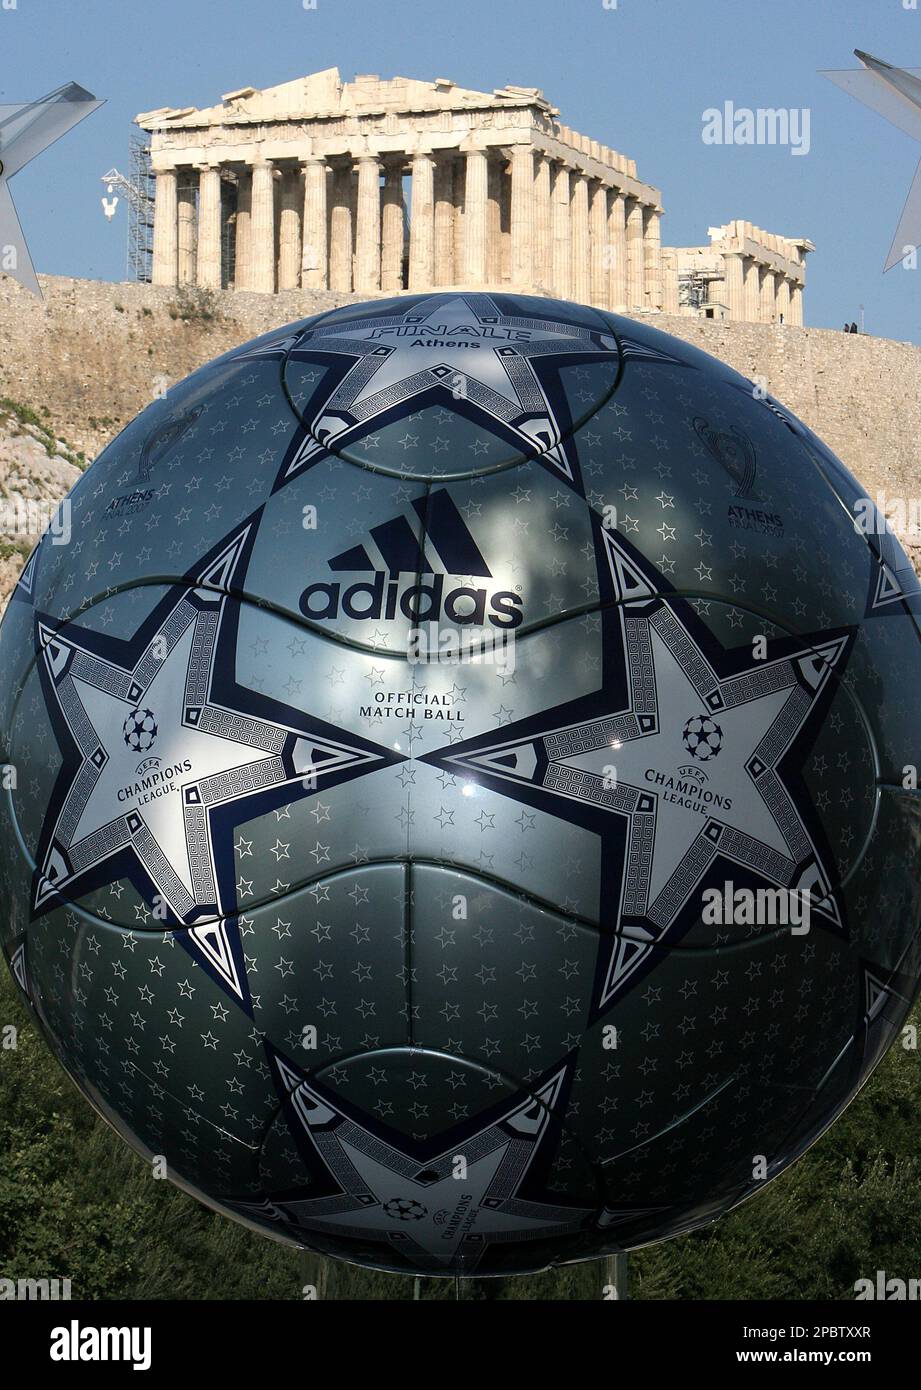 The official ball of Champions League final is seen in front of the ancient  Acropolis, in Athens on Thursday, March 8, 2007. The ceremony was held to  unveil the new ball that